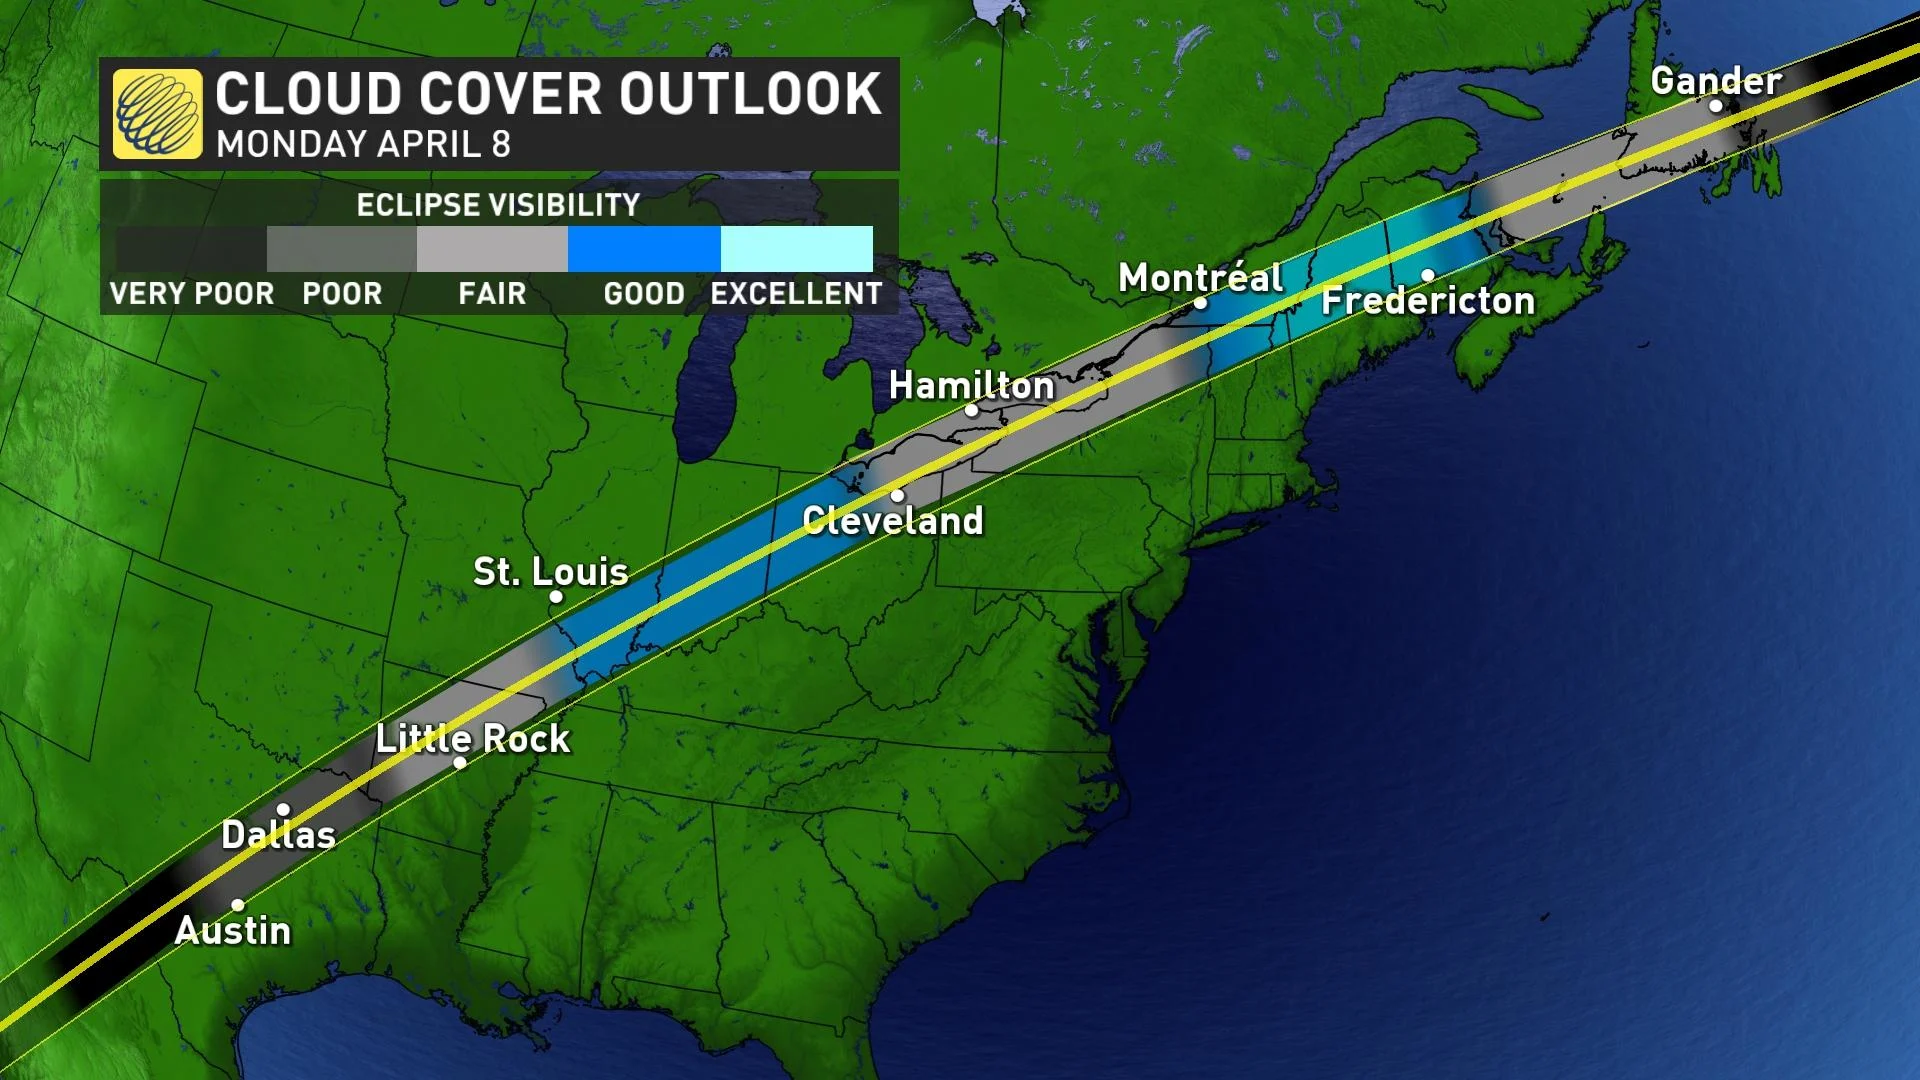 North America cloud cover outlook, April 6